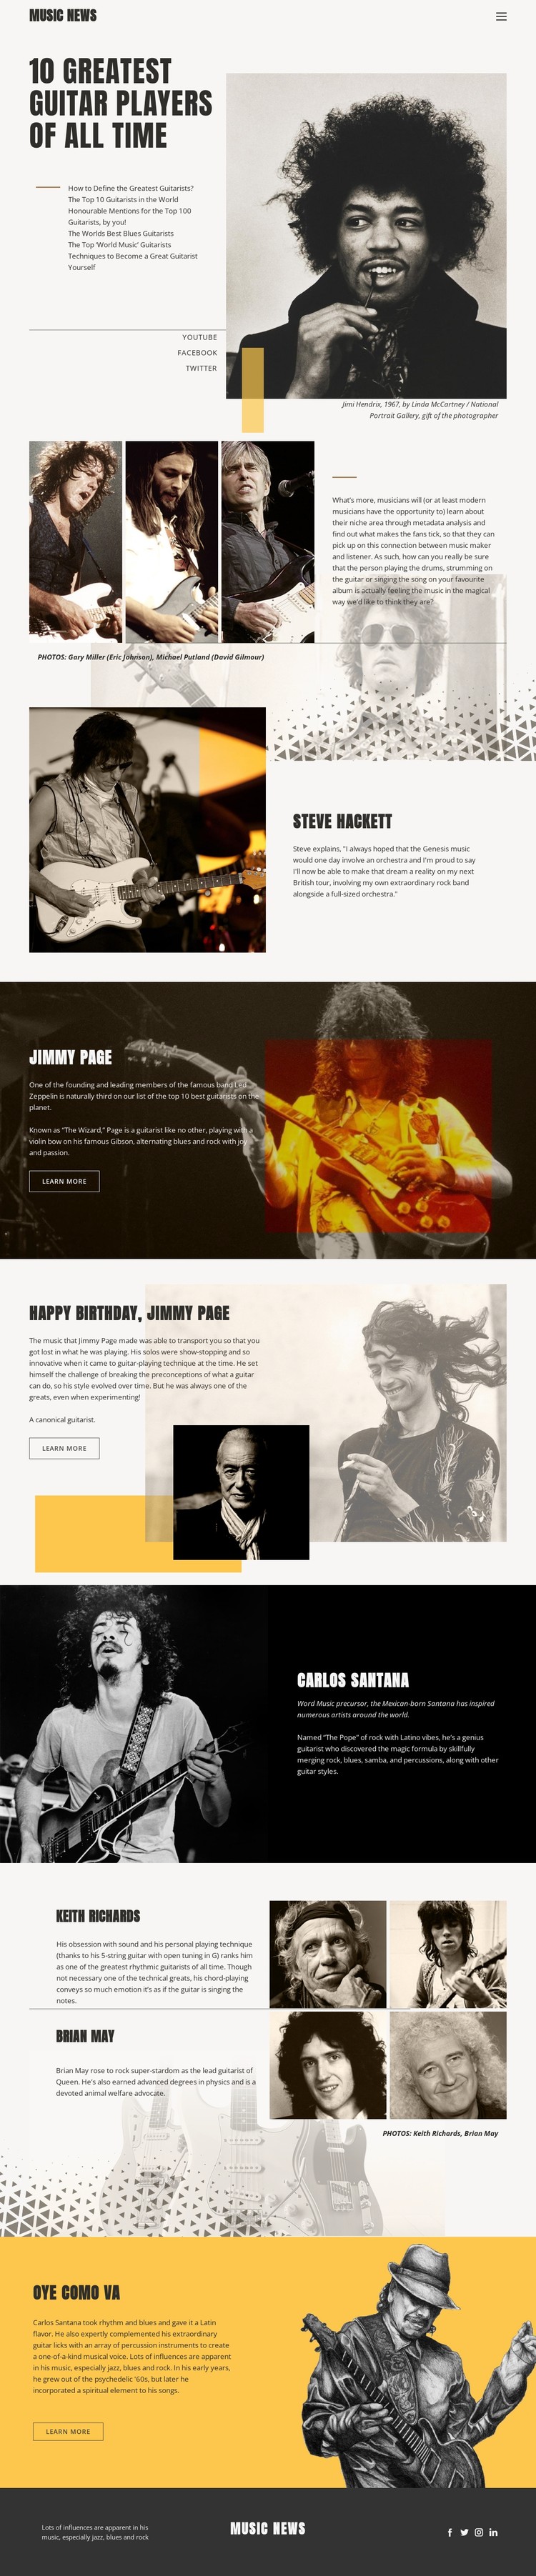 The Top Guitar Players CSS Template